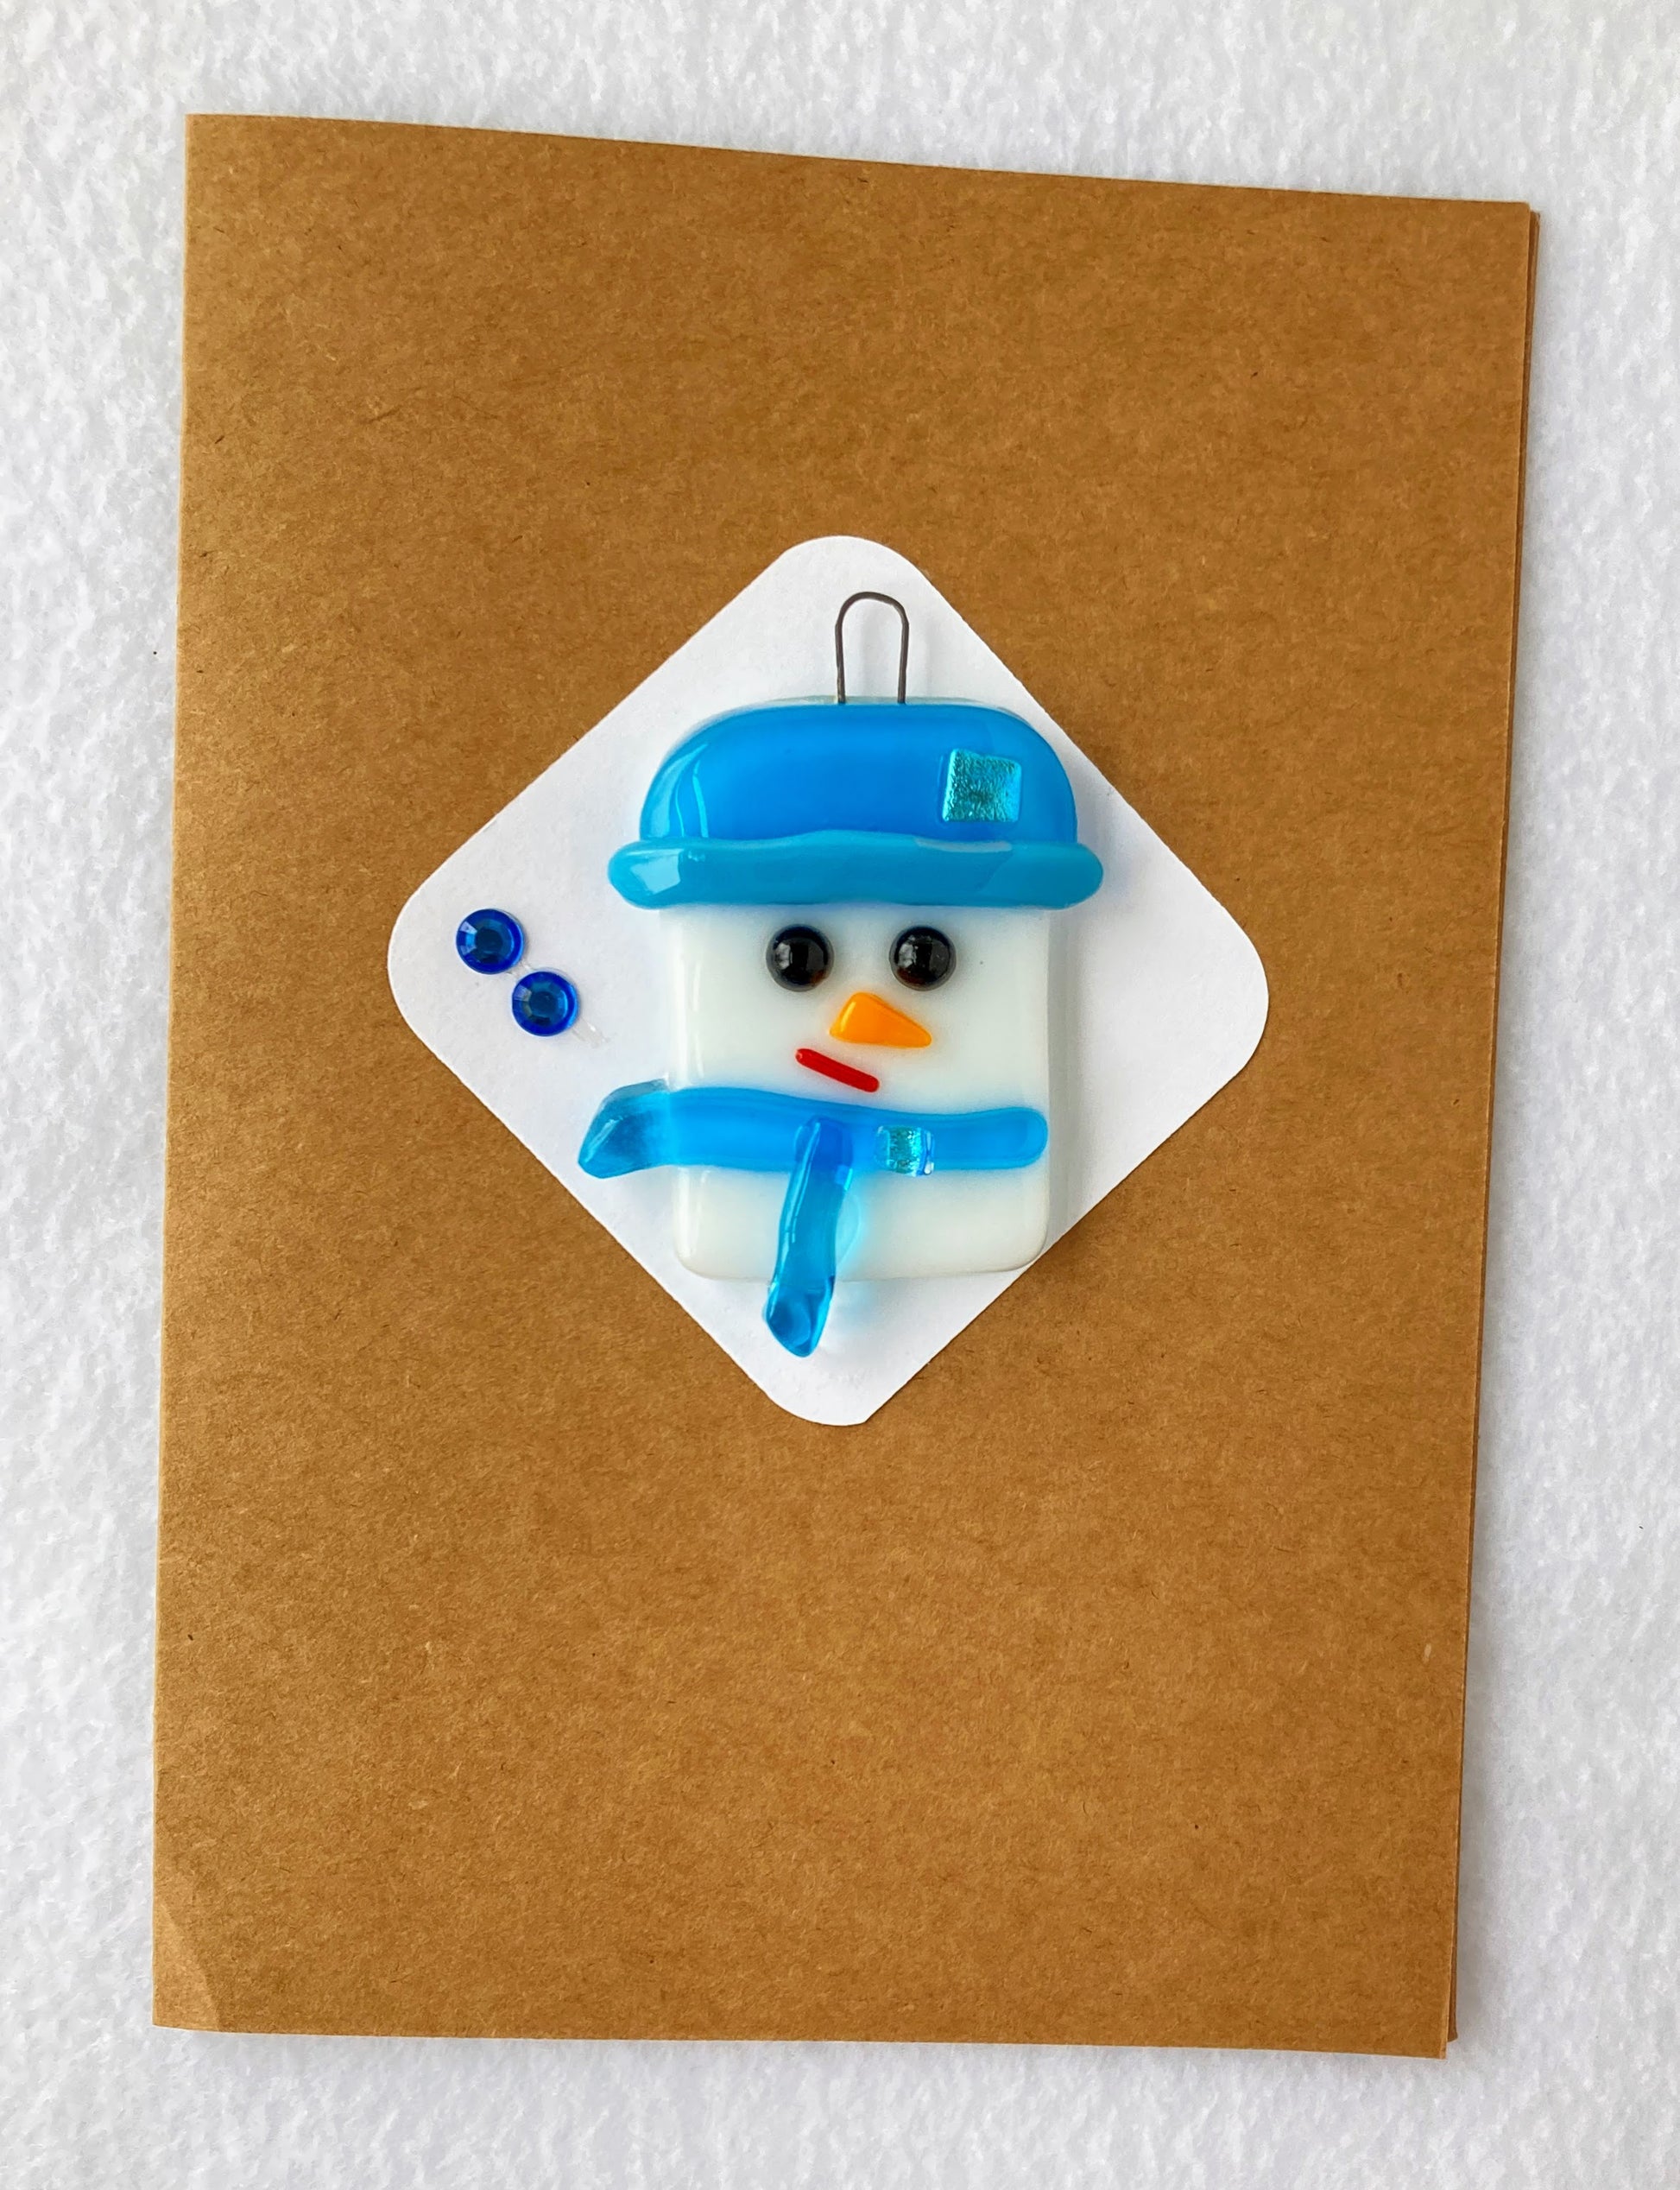 Fused Glass Christmas Ornament  Snowman with aqua blue scarf and hat  2' wide 2' long 0.25 high ornament